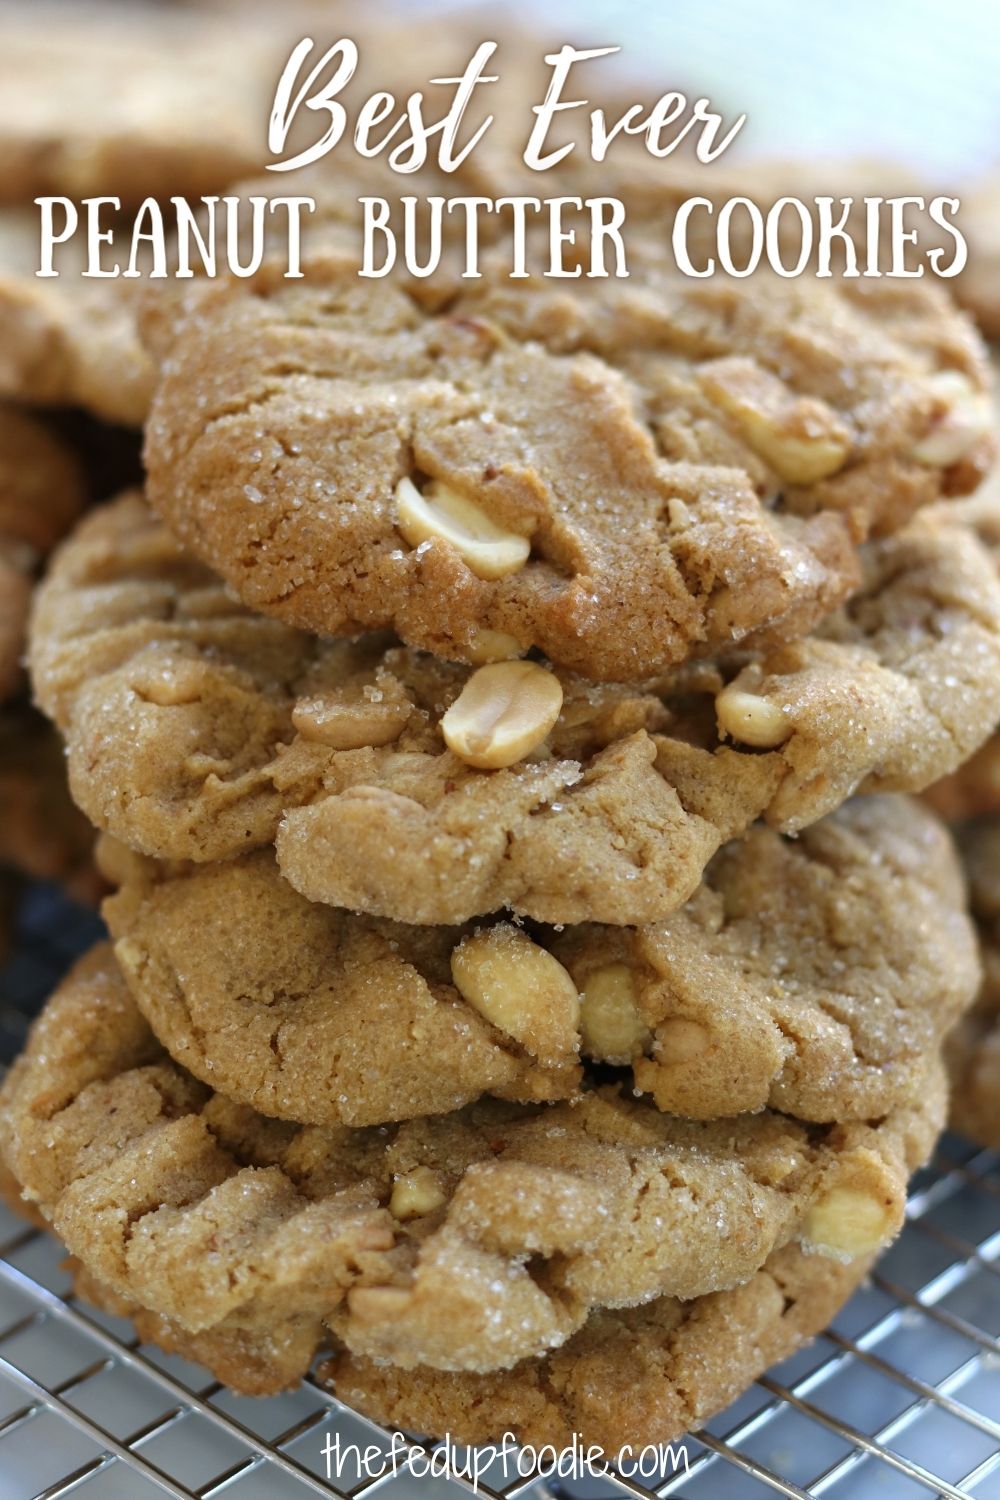 Best Peanut Butter Cookies recipe creates soft and chewy cookies that are peanut butter lovers dream come true. These melt in your mouth cookies are made from natural peanut butter, whole peanuts and peanut butter chips. 
#PeanutButterCookies #PeanutButterCookiesRecipe #PeanutButterCookieEasy #PBCookies #PeanutButterCookiesWithPeanutChips #PeanutButterCookiesChewy #PeanutButterCookiesWithCrunchyPB